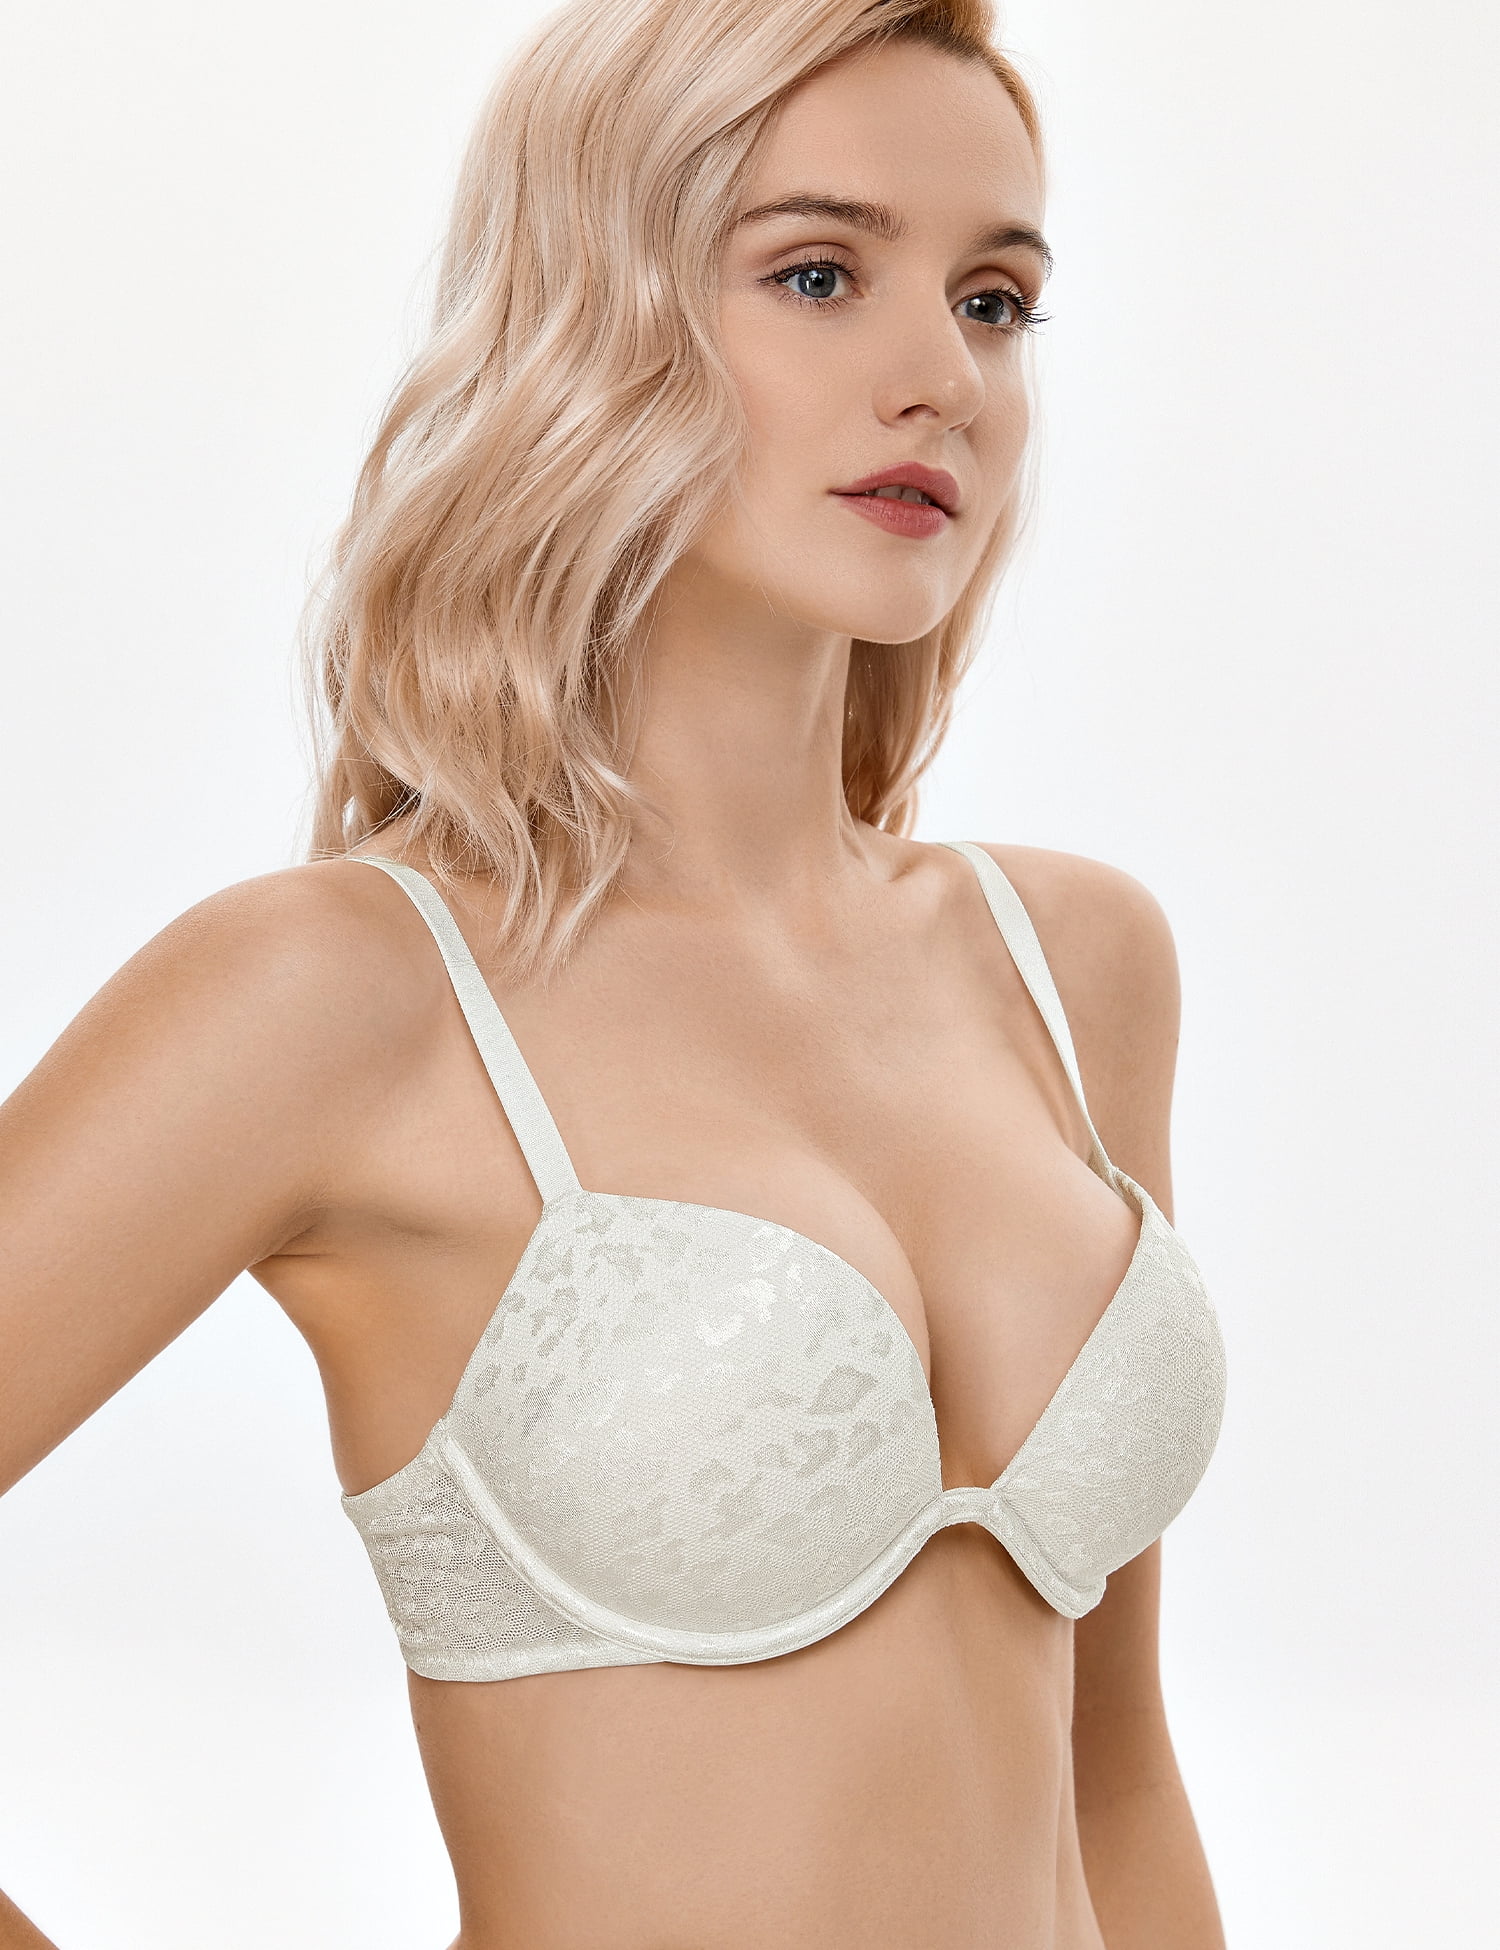 White Push Up Correct Bra Sizes Deep V Plunge Plus Size Big Cup Women S Bra  Ladies Everyday Sexy Correct Bra Size Wire Free 70 75 80 85 90 95 A B C D E  LJ200815 From Luo02, $10.44